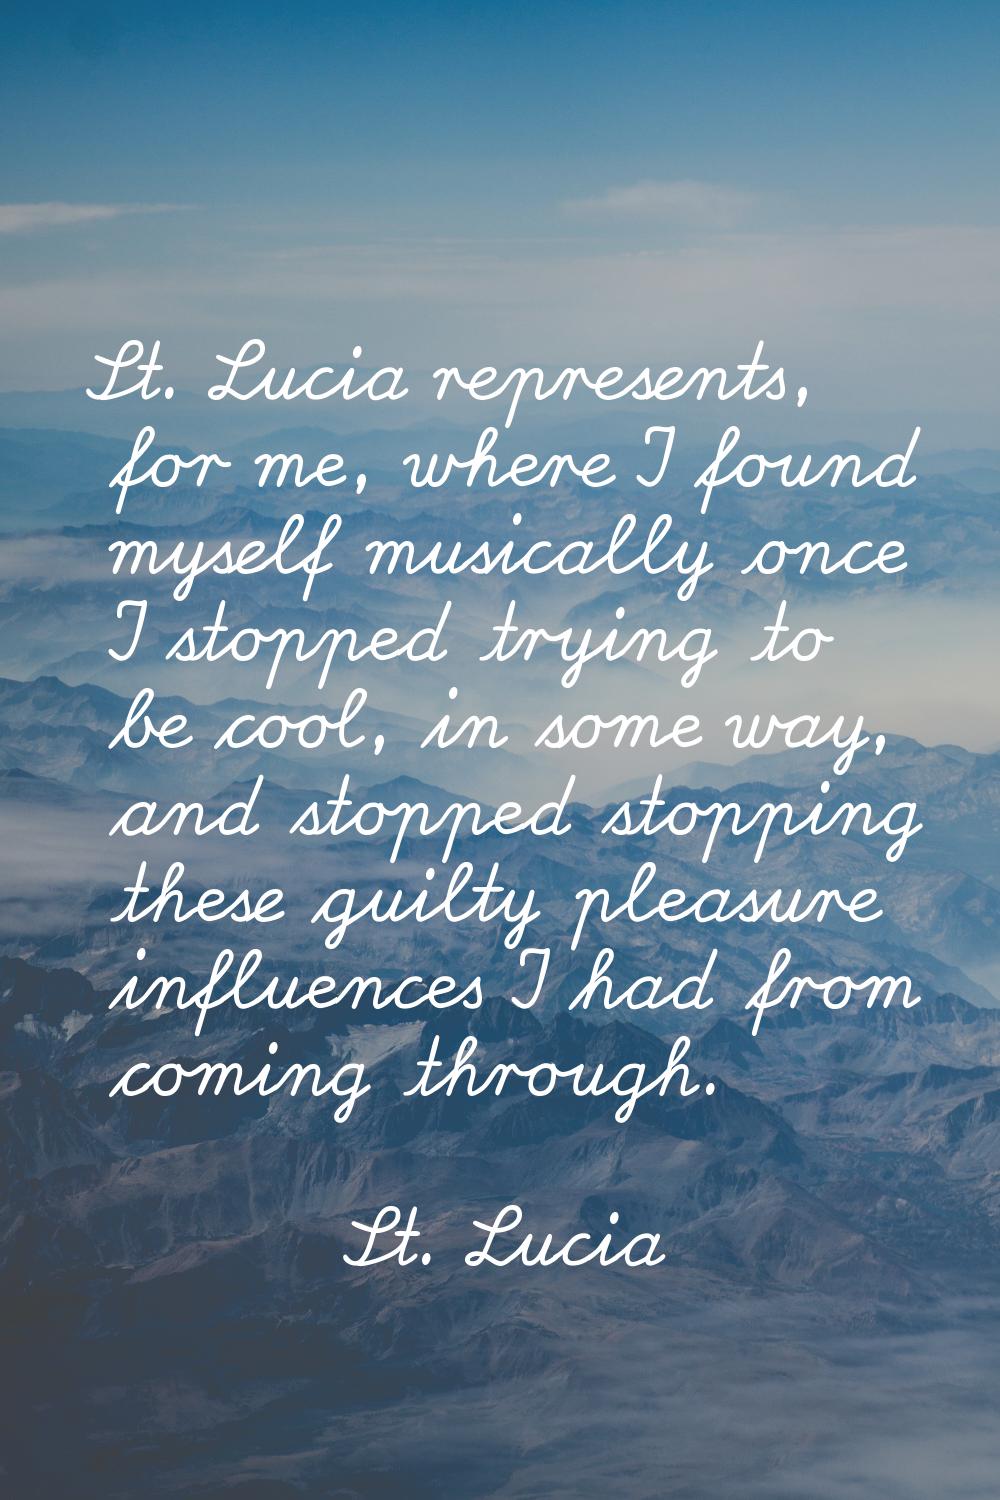 St. Lucia represents, for me, where I found myself musically once I stopped trying to be cool, in s